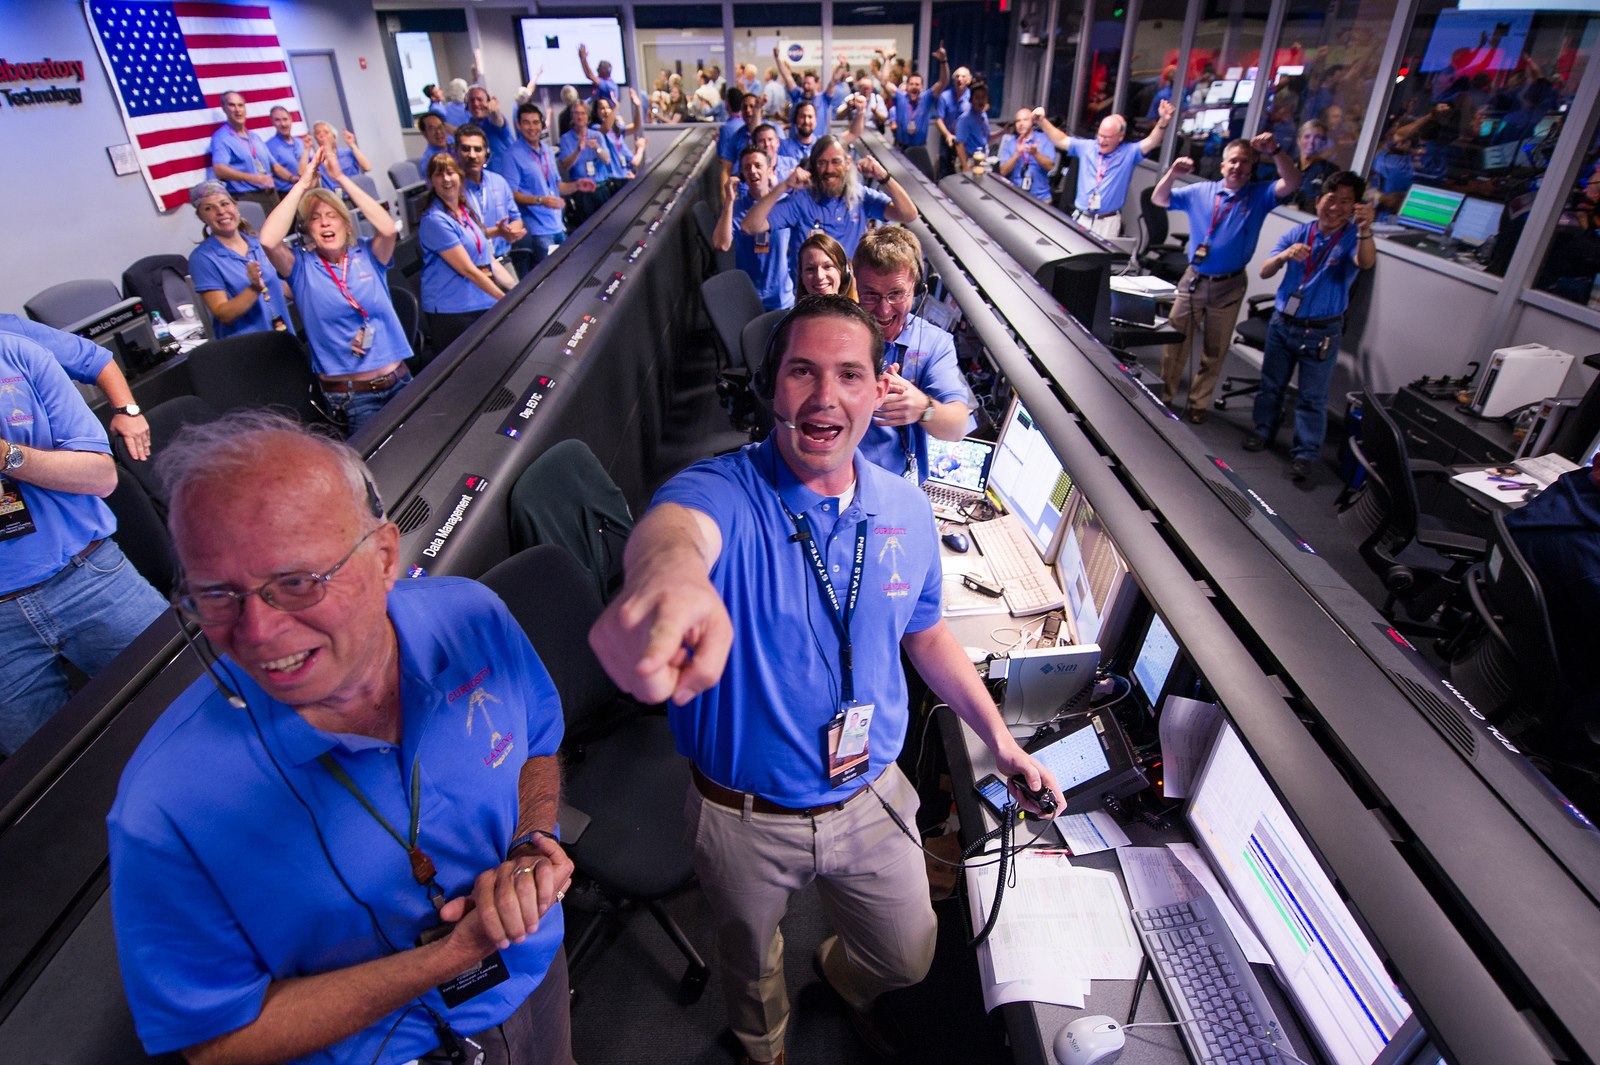 HISTORIC MOMENT. The Mars Science Laboratory (MSL) team in the MSL Mission Support Area reacts after learning the the Curiosity rover has landed safely on Mars and images start coming in at the Jet Propulsion Laboratory on Mars, Sunday, Aug. 5, 2012 in Pasadena, Calif. The MSL Rover named Curiosity was designed to assess whether Mars ever had an environment able to support small life forms called microbes. Photo Credit: NASA/Bill Ingalls